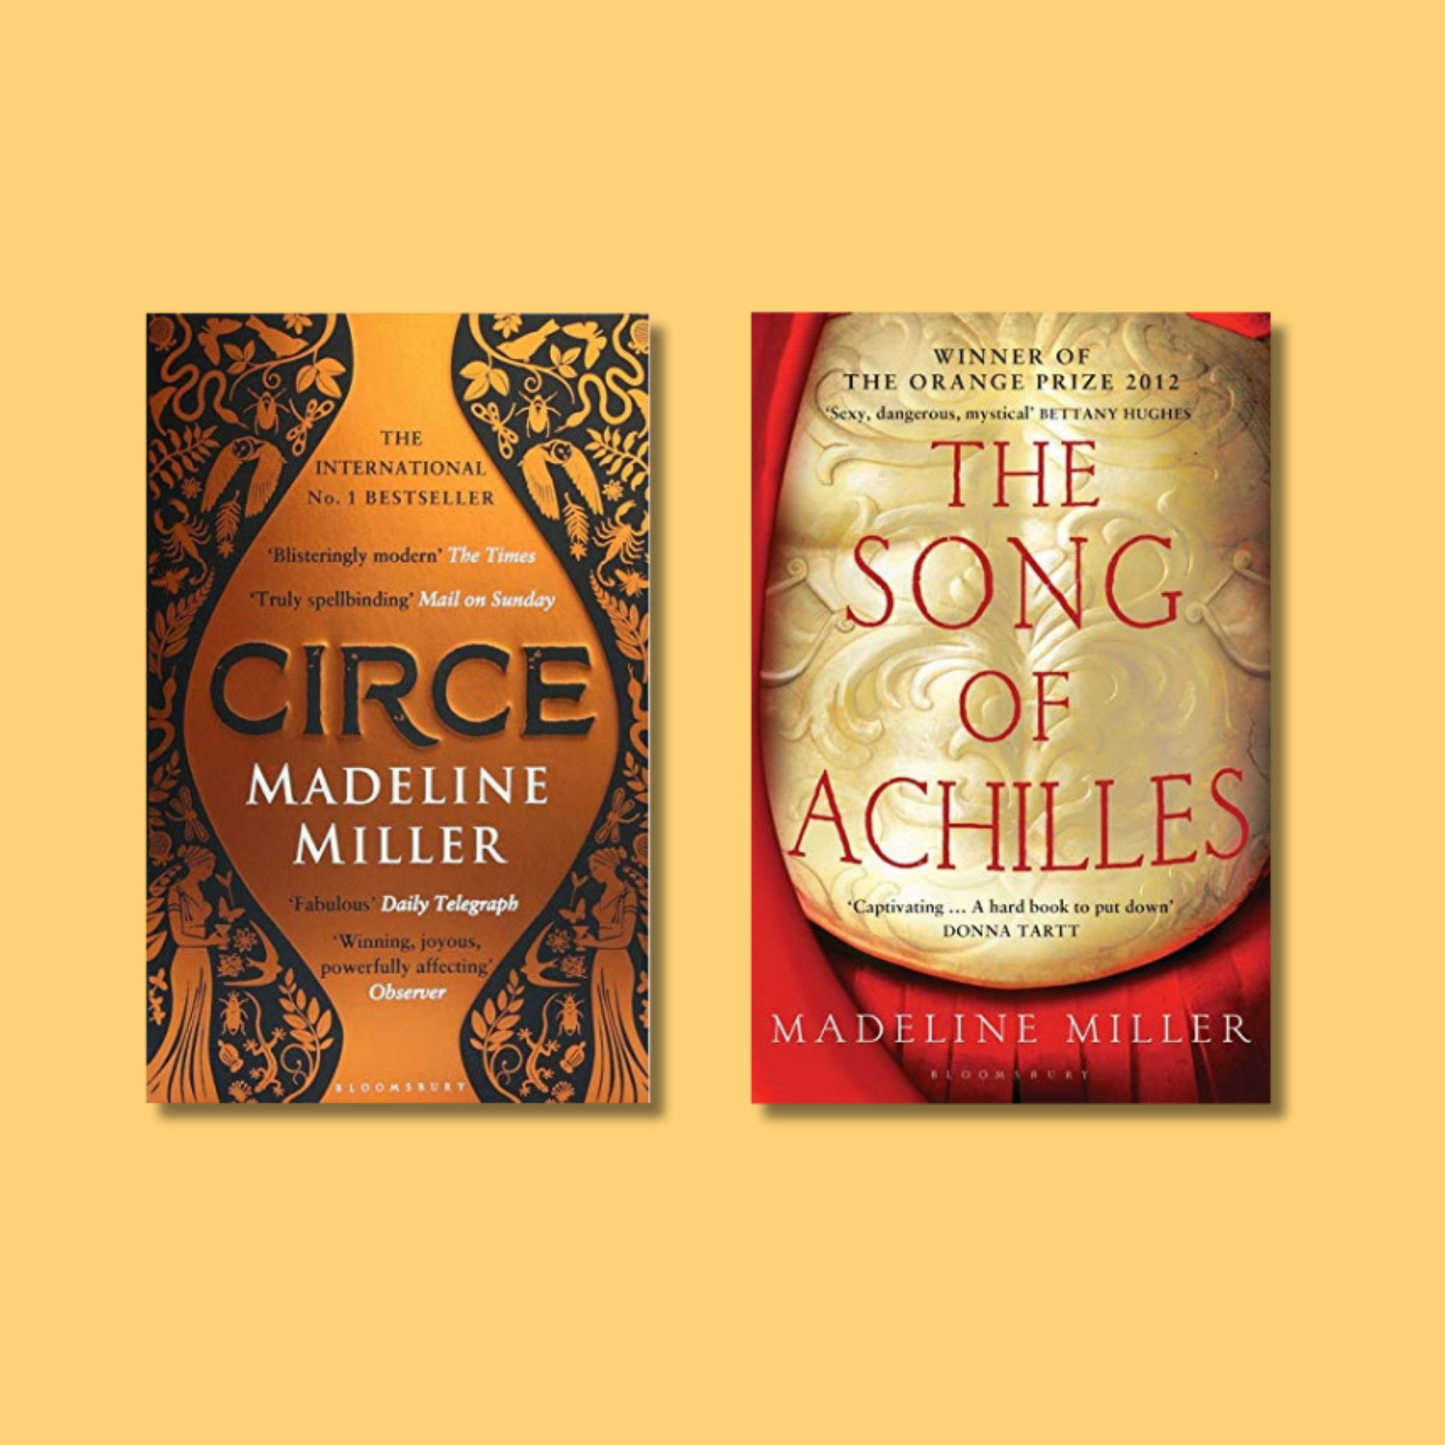 (COMBO PACK) Circe + The Song of Achilles (Paperback)